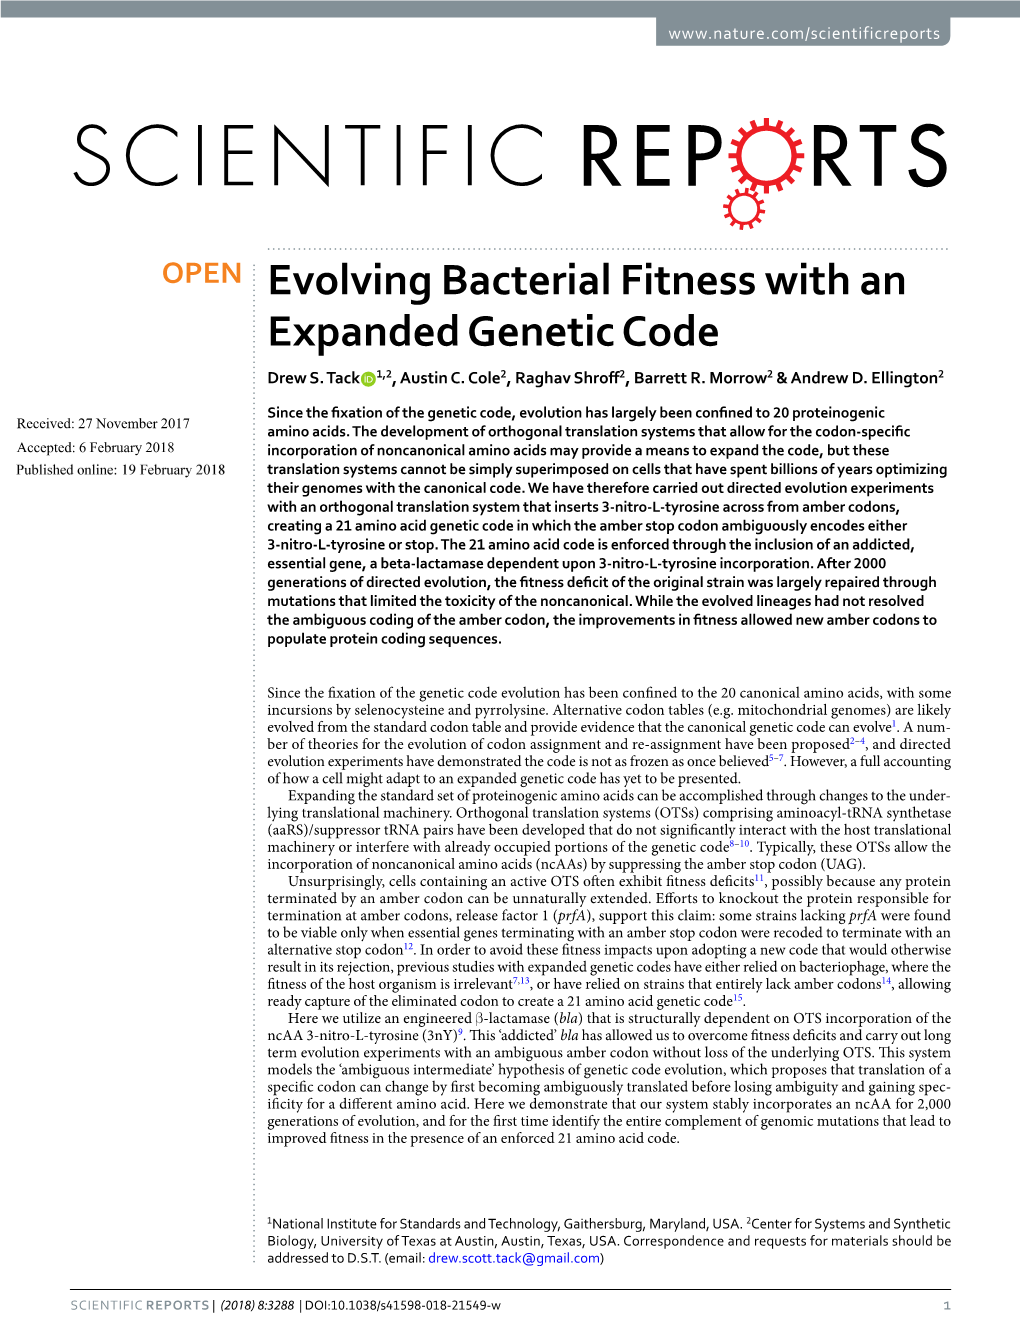 Evolving Bacterial Fitness with an Expanded Genetic Code Drew S